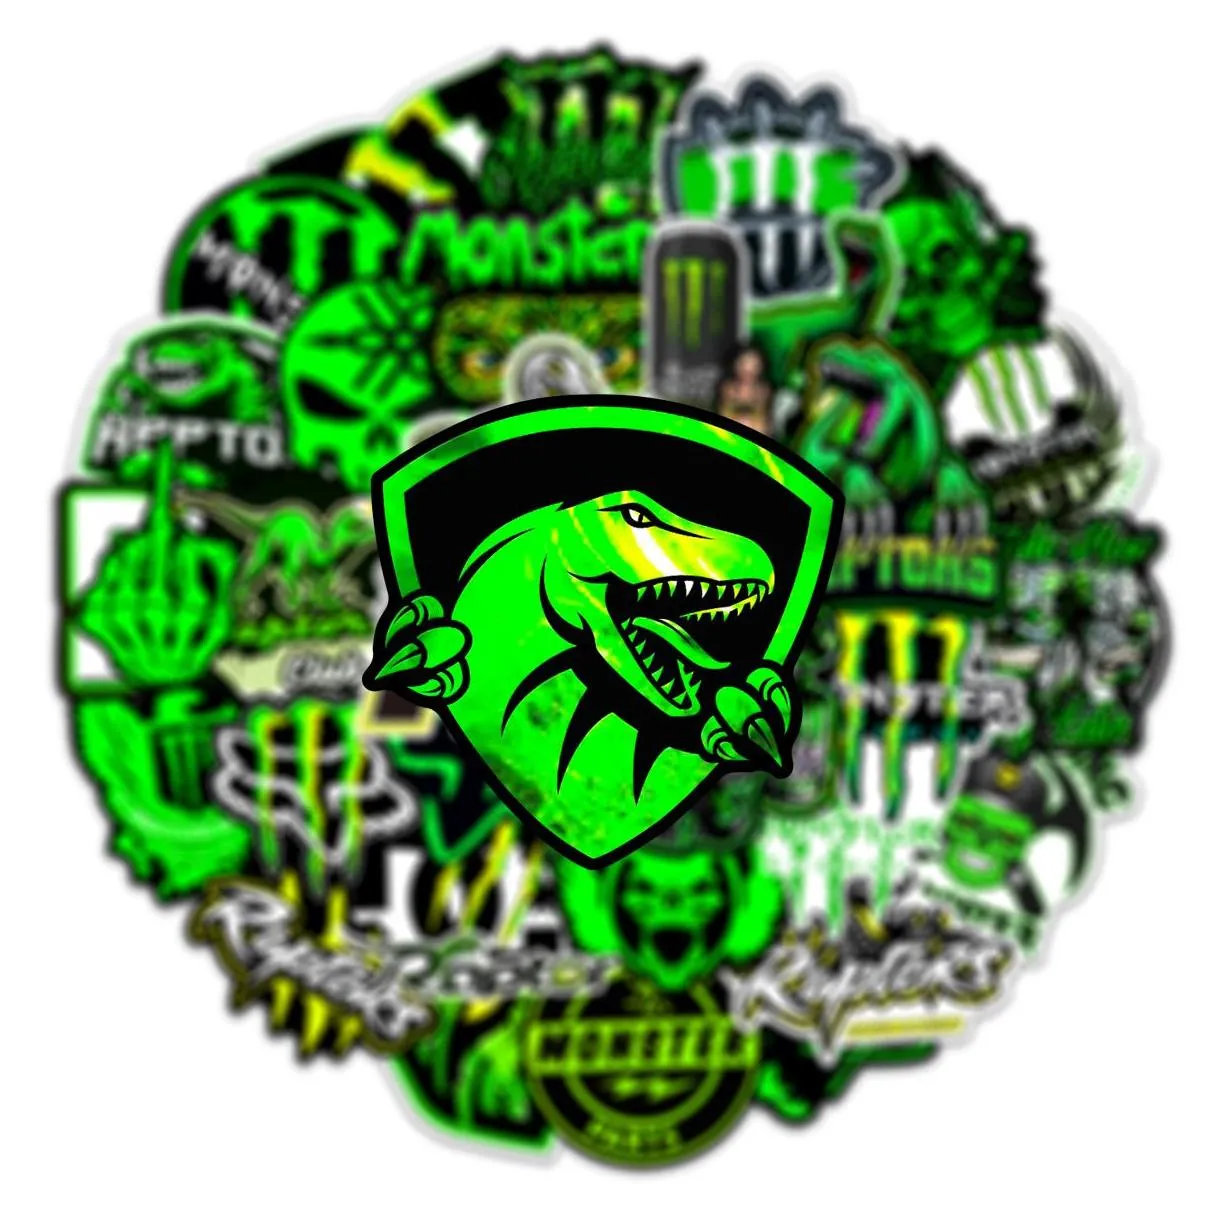 50Pcs Green Fluorescent Dazzle Personality Trend Sticker Monster hunter Stickers Graffiti Kids Toy Skateboard Car Motorcycle Bicycle Sticker